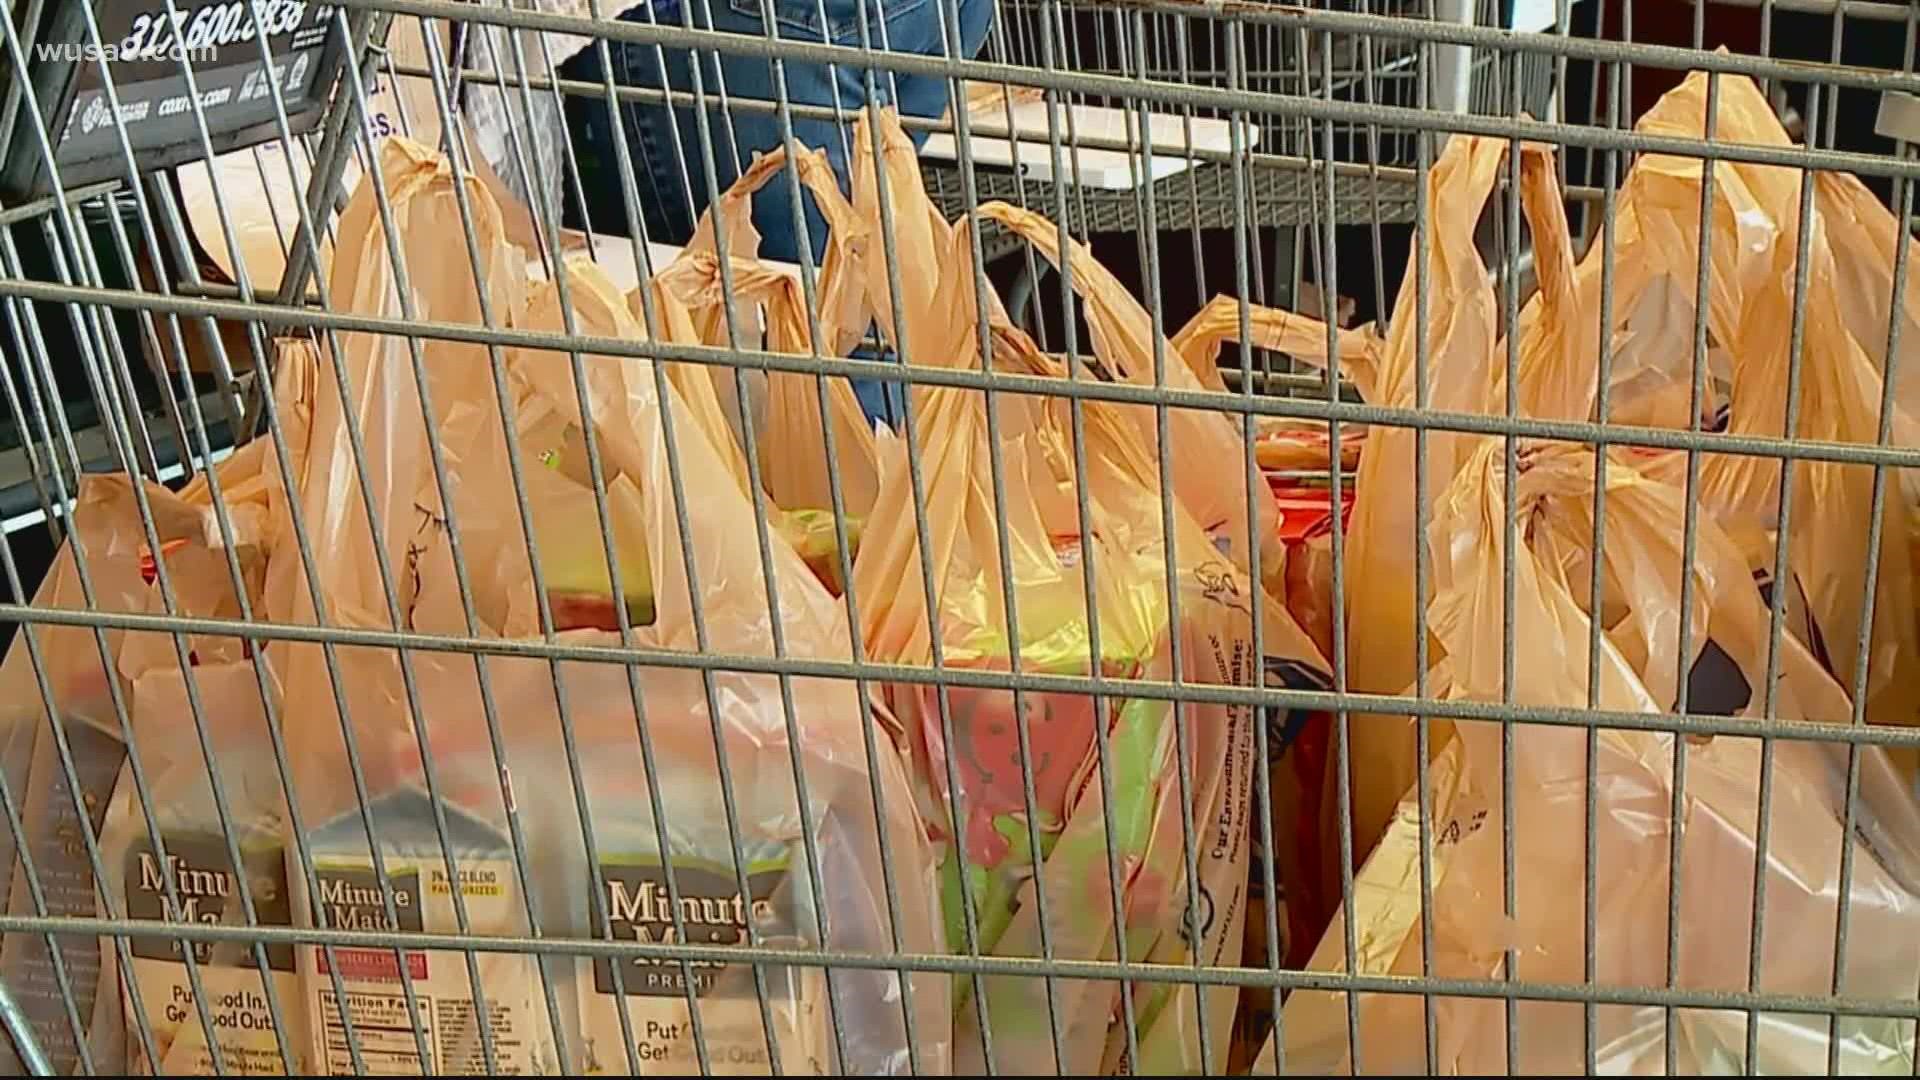 Avoid paying a 5 cent plastic bag tax in these Virginia counties by bringing reusable bags as you shop. WUSA9 spoke to Fairfax County Supervisor James Walkinshaw.